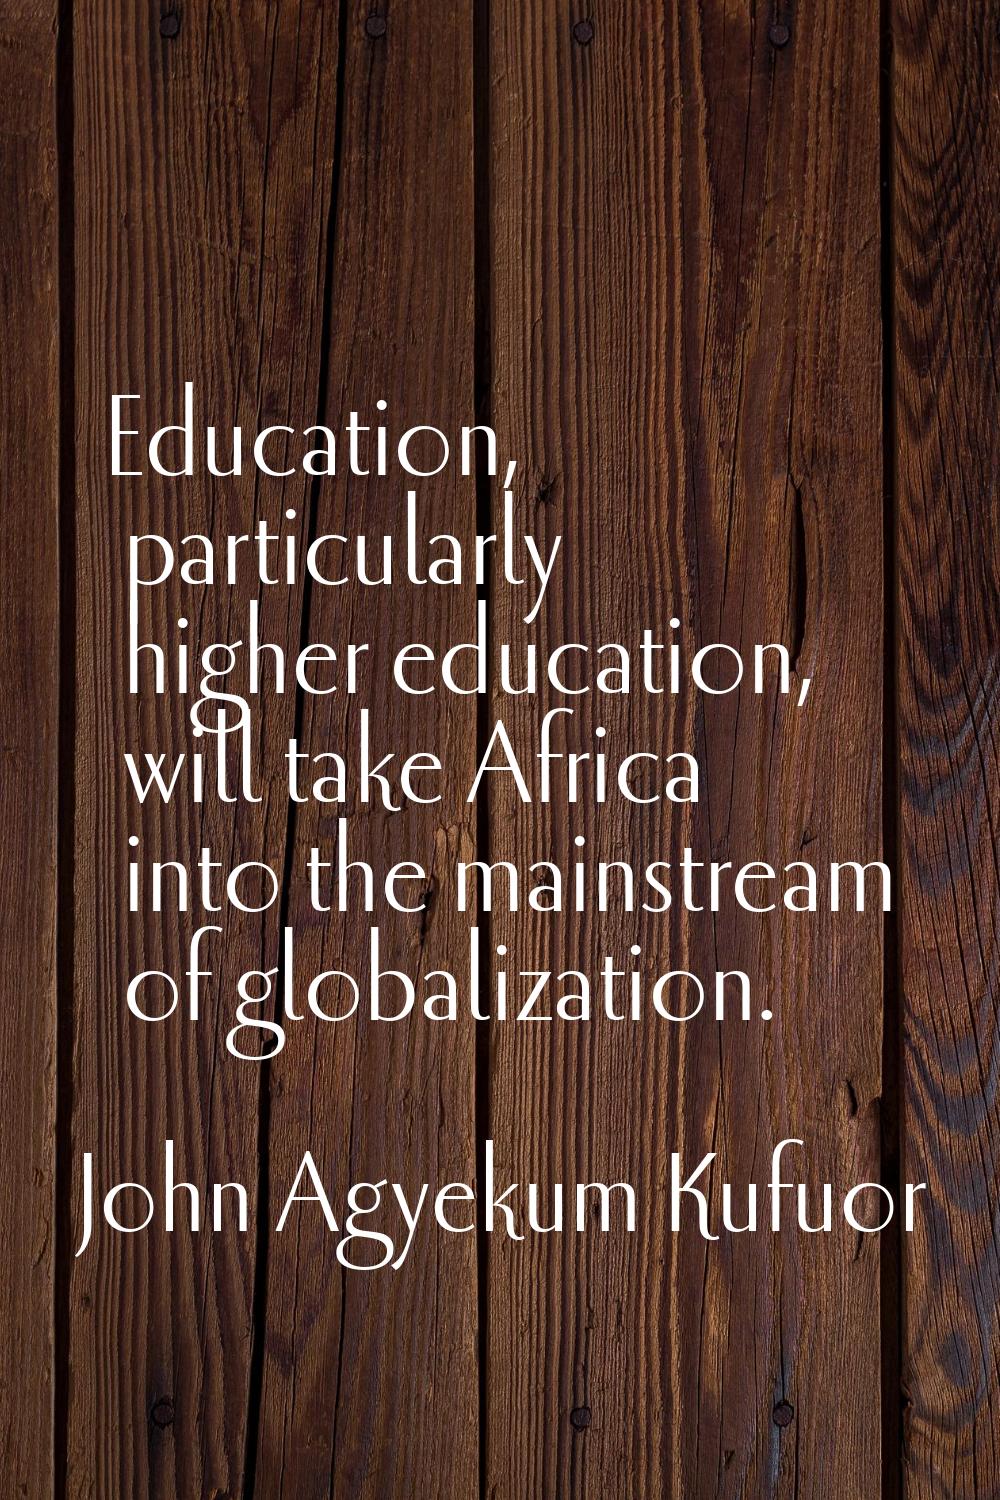 Education, particularly higher education, will take Africa into the mainstream of globalization.